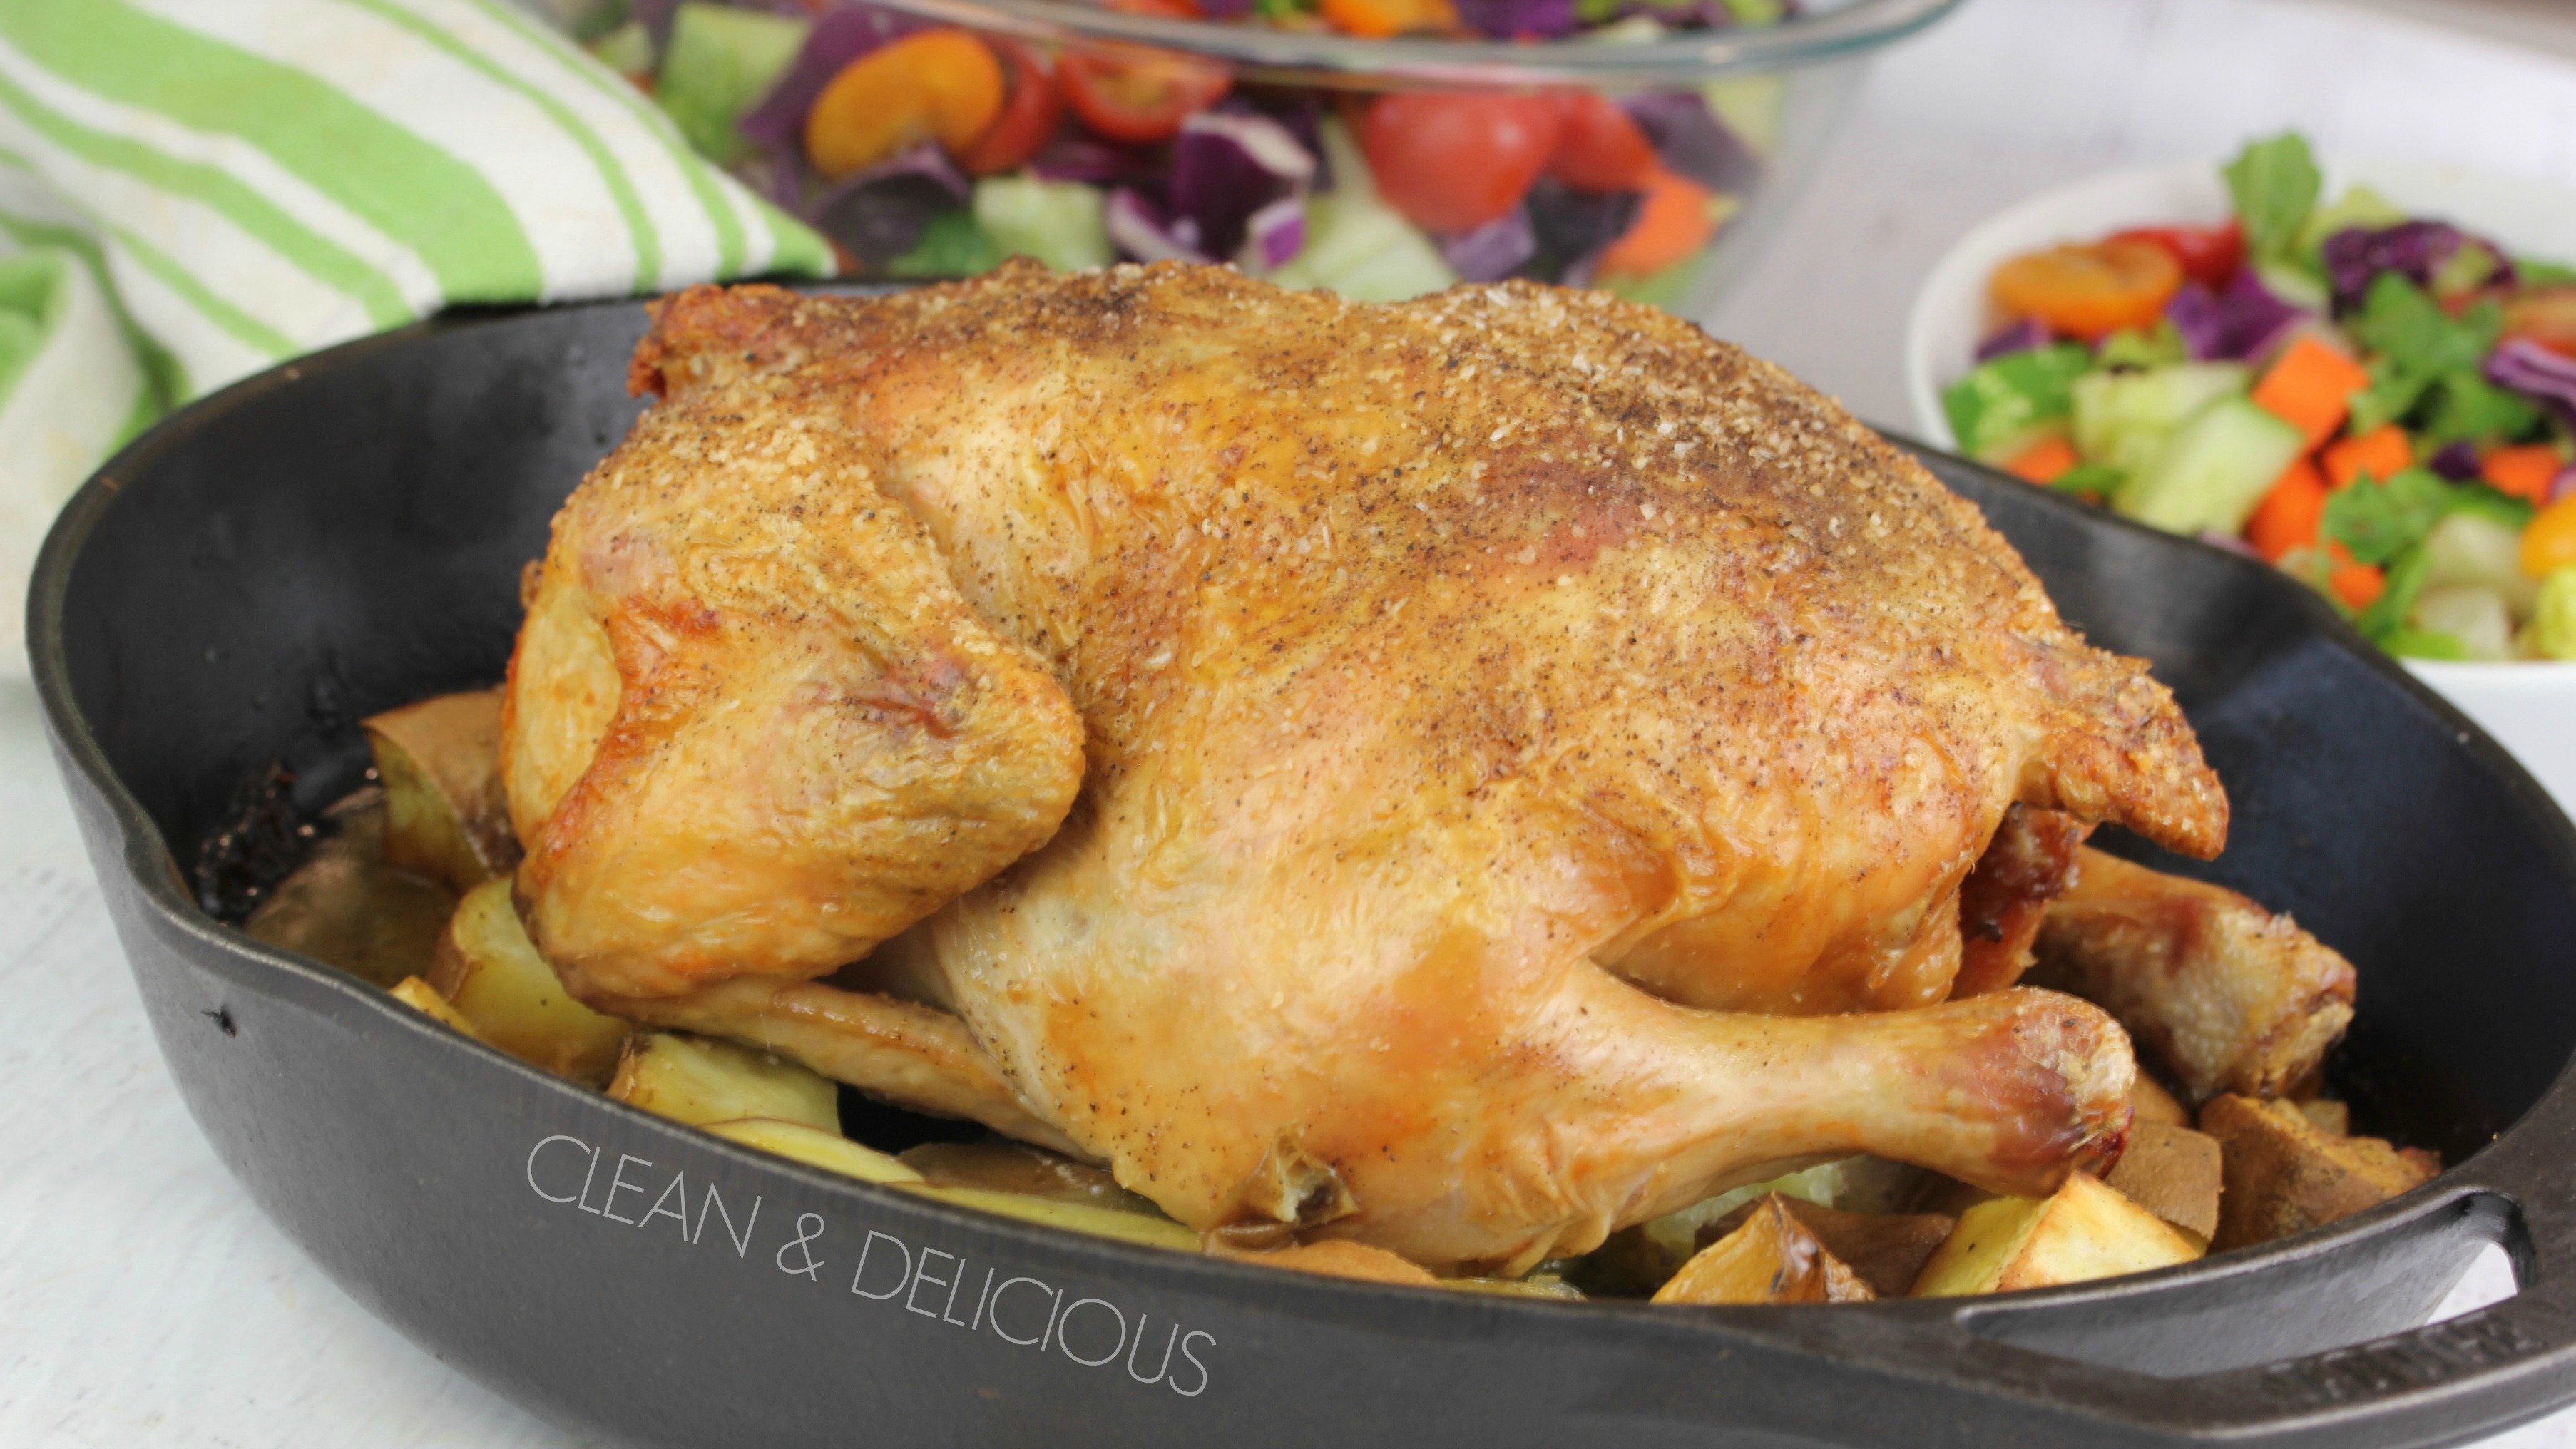 Delicious roasted chicken photo